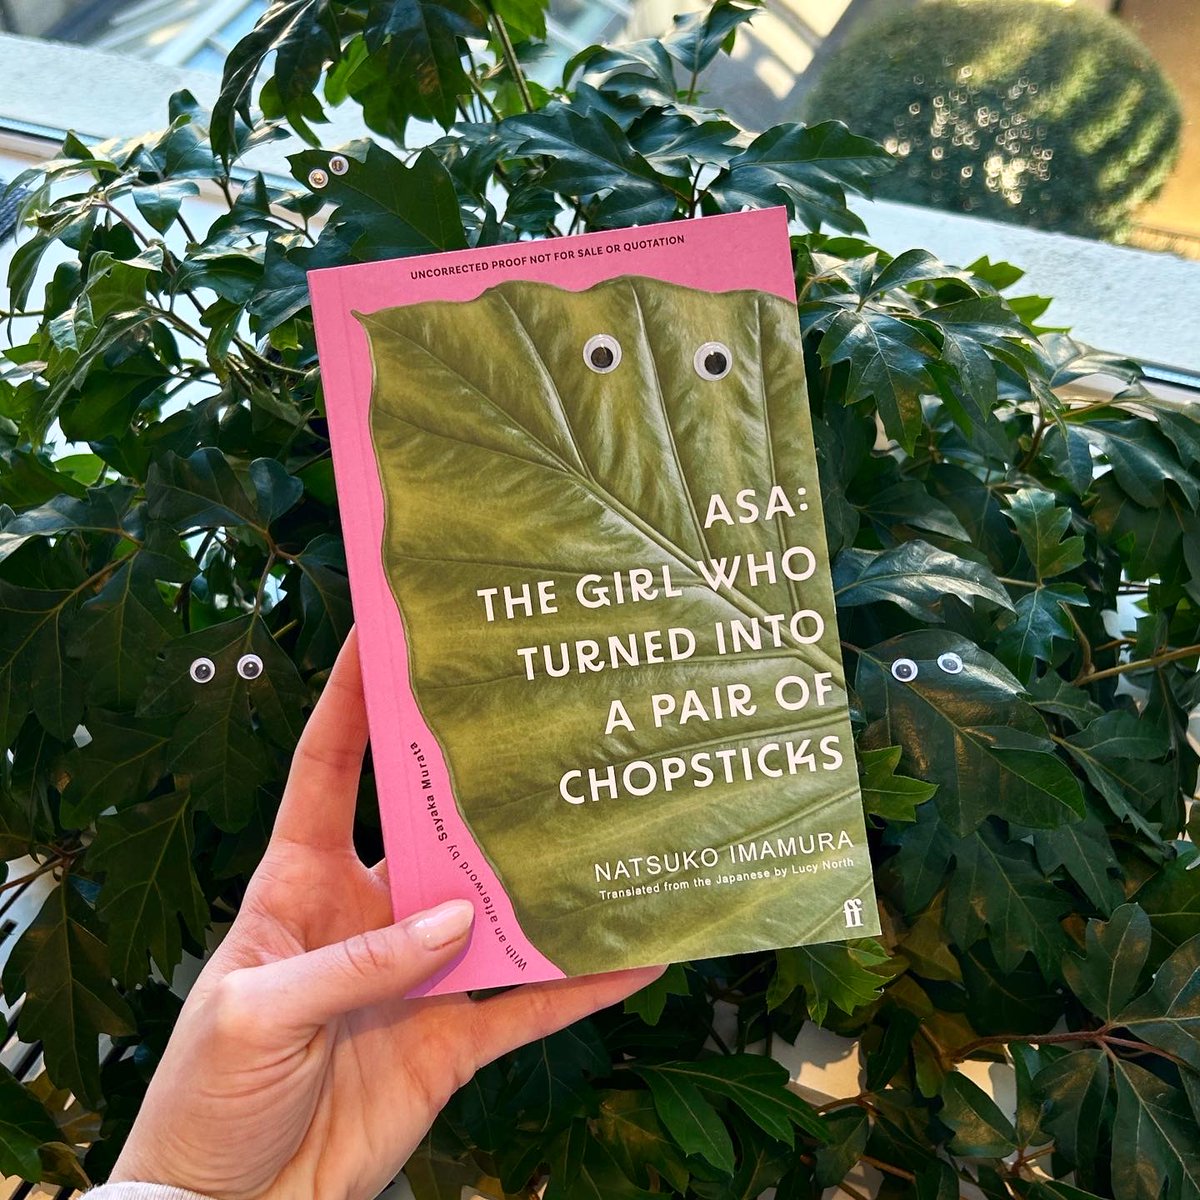 Advance proofs of the startling first collection of stories from Natsuko Imamura are catching our eye today 👀 Asa: The Girl Who Turned into a Pair of Chopsticks is translated from the Japanese by @japanonmymind and out in paperback this June. Cover design by Robbie Porter.